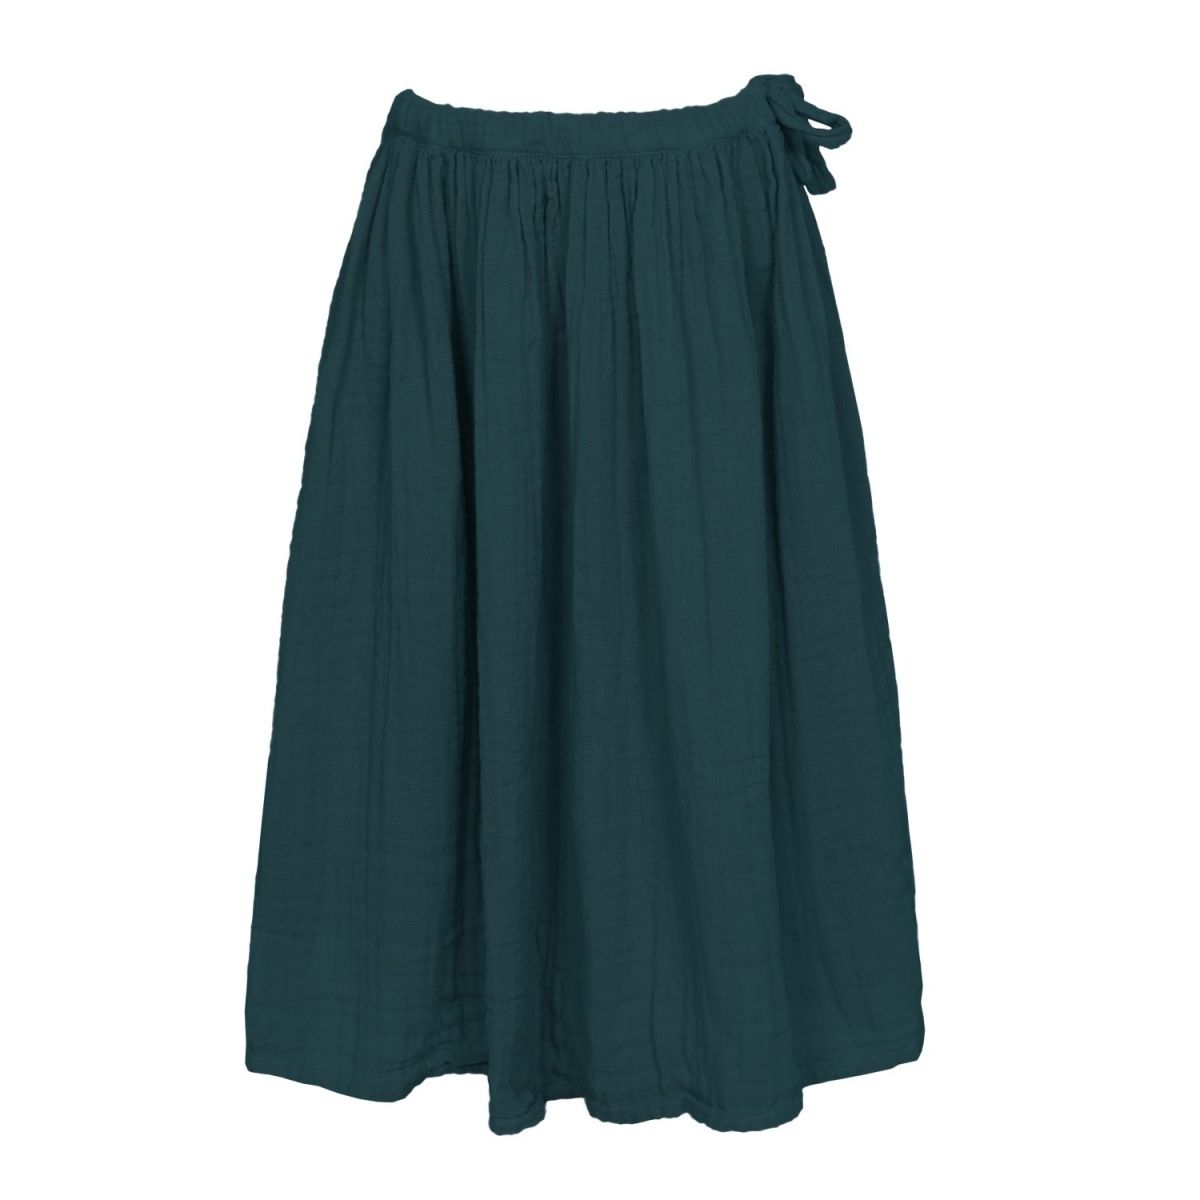 Numero 74 - Skirt for girls Ava long teal blue - Skirts and